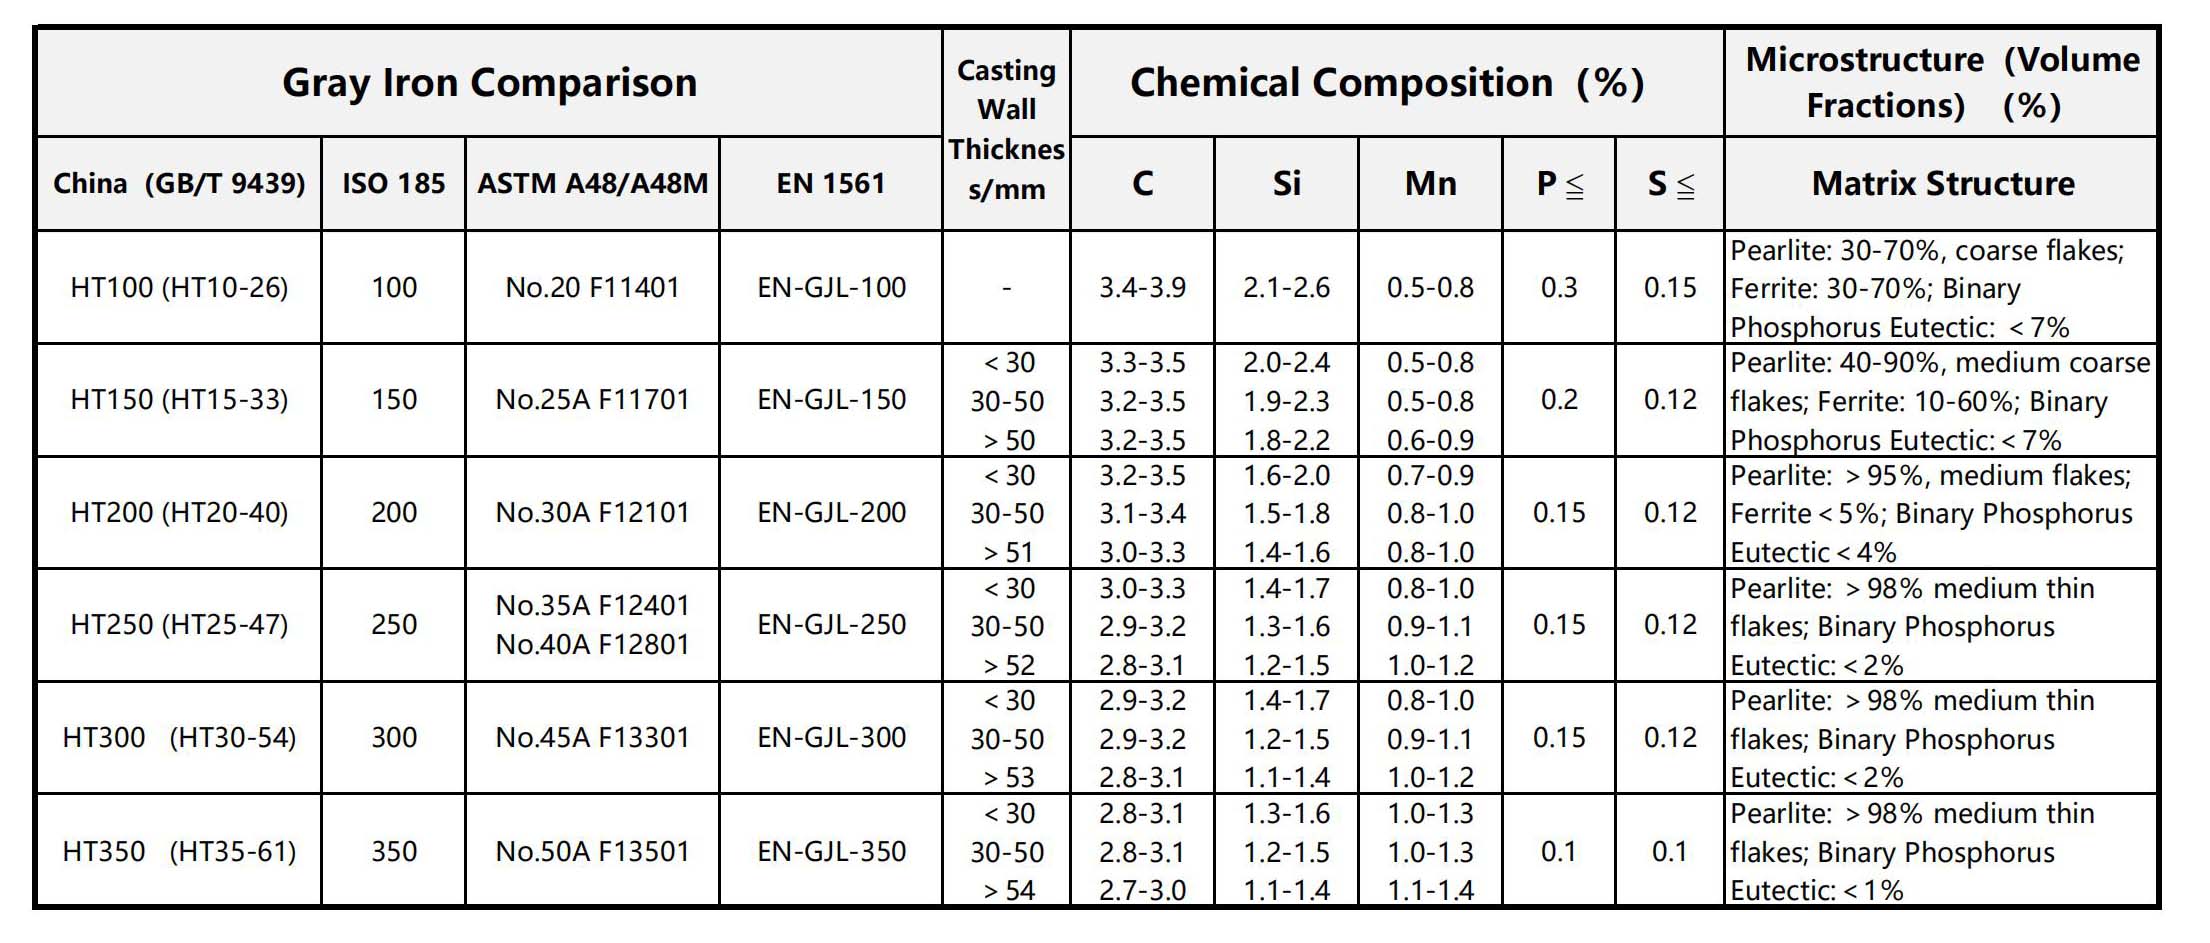 Gray Iron Chemical Composition and Matrix Structure